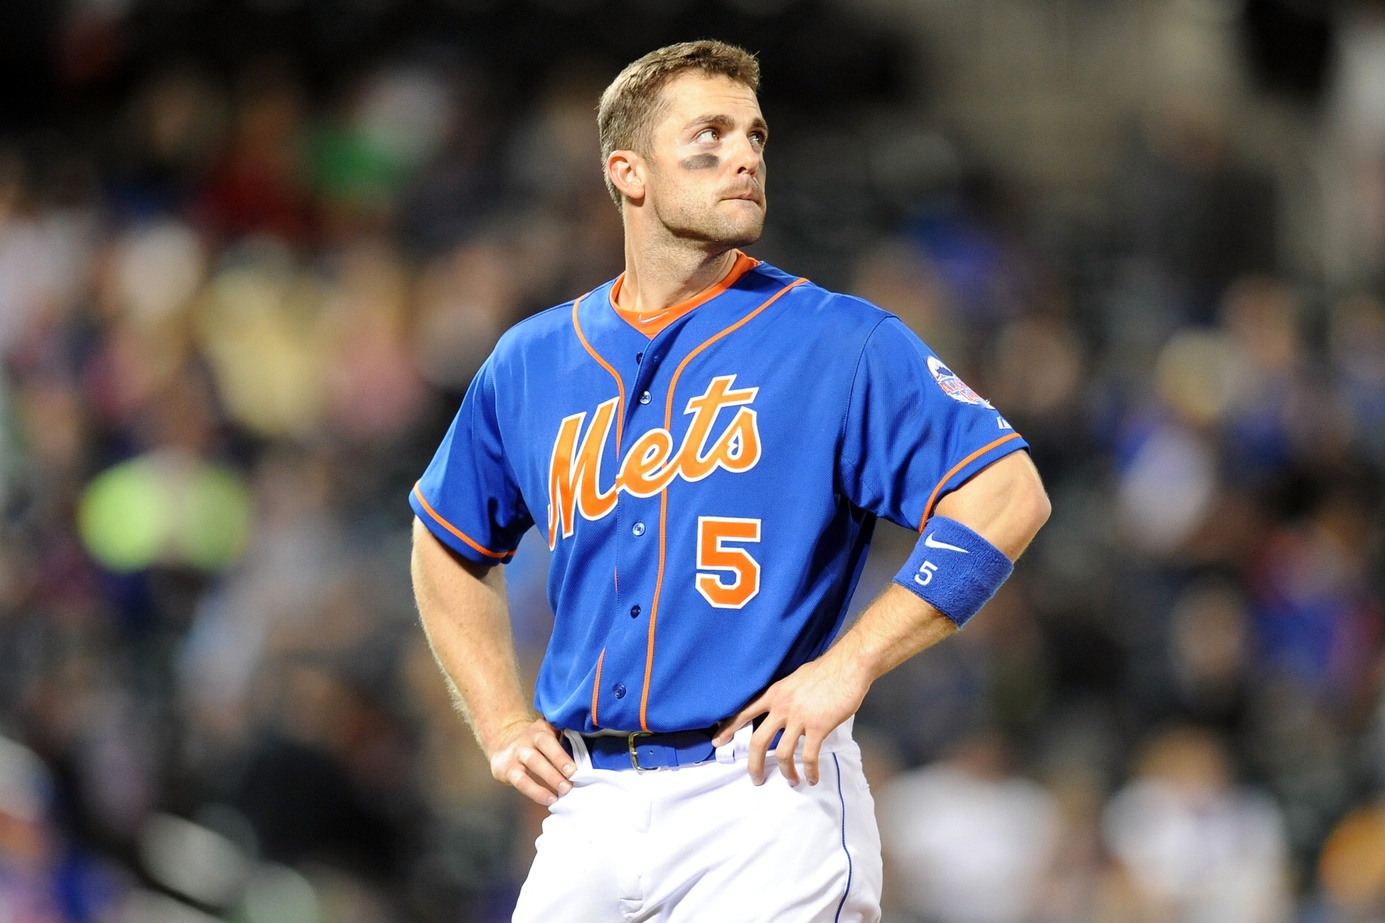 MONDAY METS: It’s Time We Talk About David